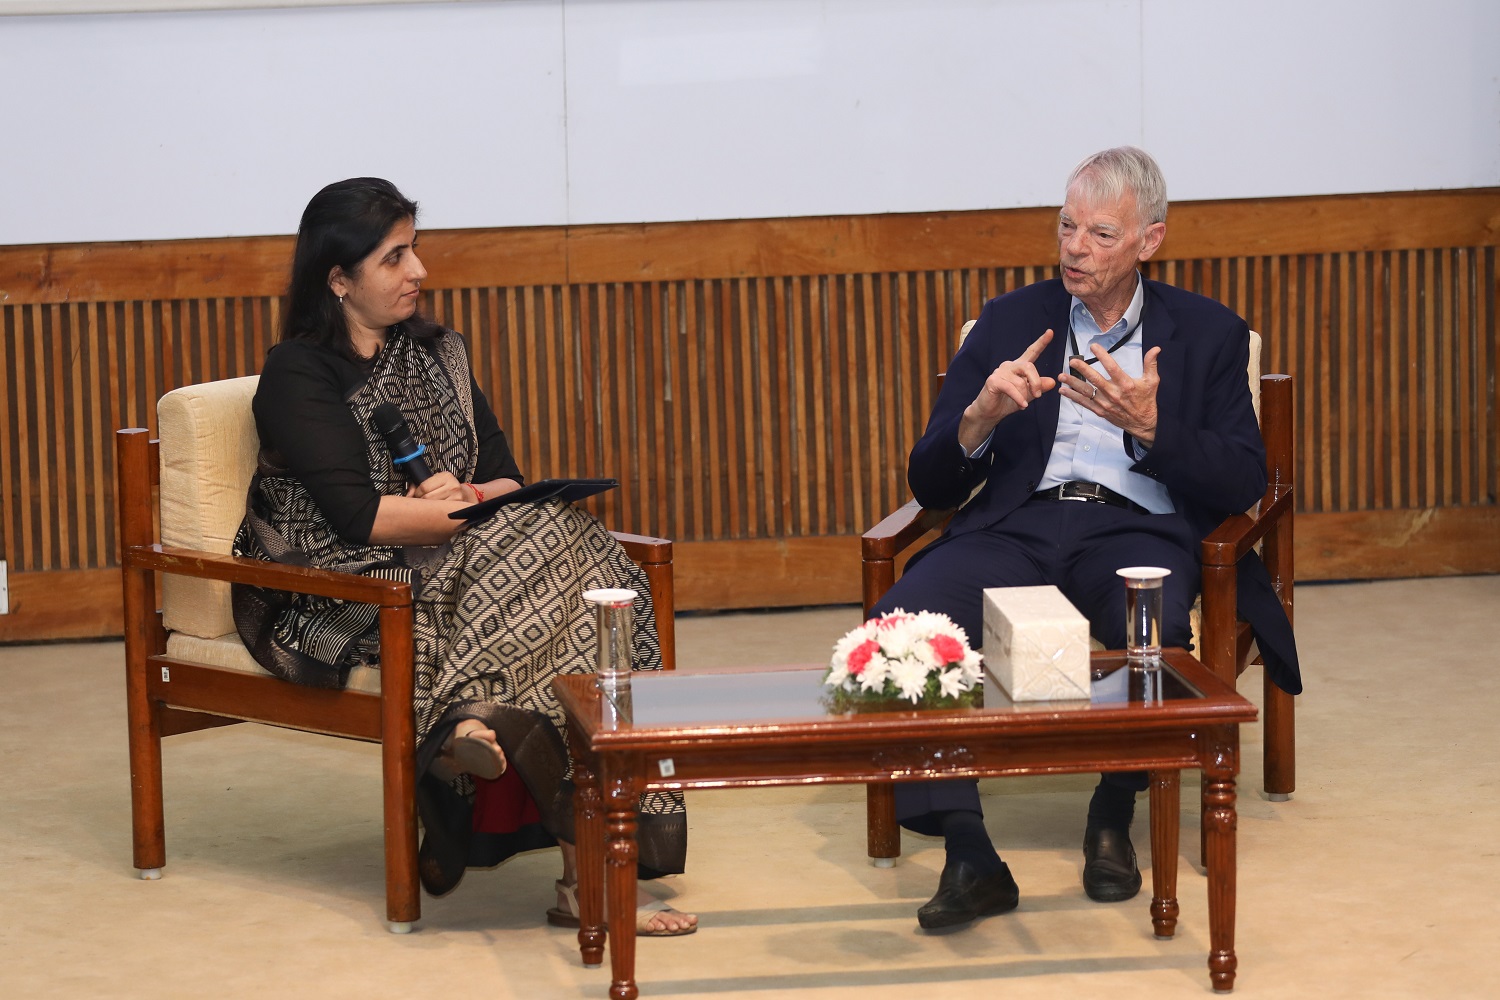 Prof. Manaswini Bhalla, from the Economics area, engages in a fireside chat with Nobel Laureate Prof. Michael Spence, on 15th February 2024.